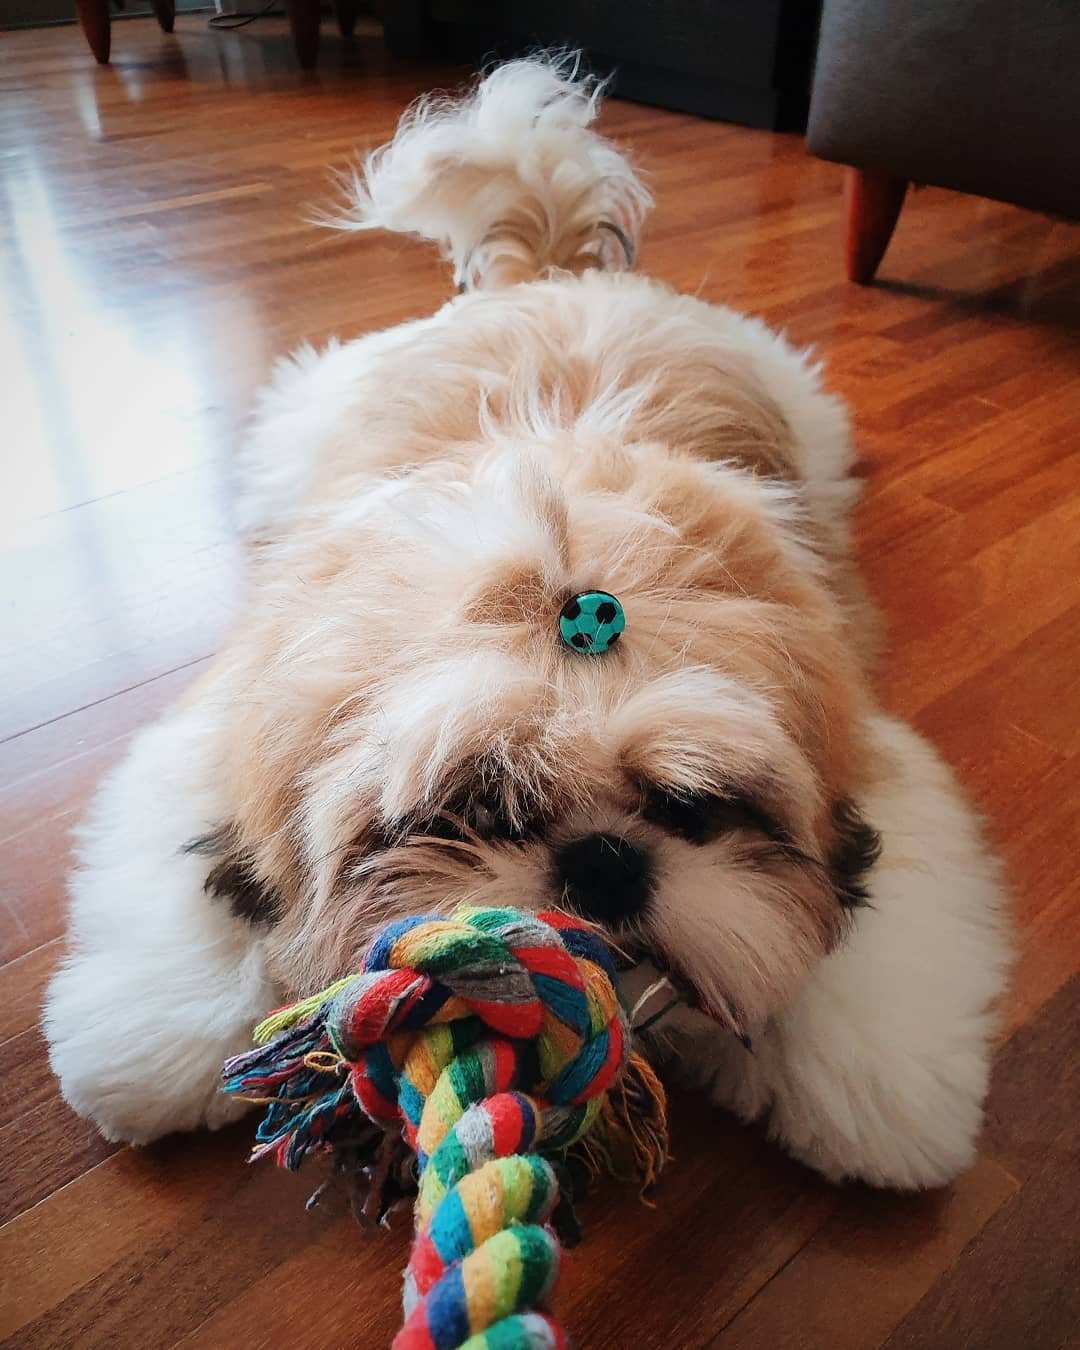 Shih Tzu lying down on the floor playing its tug toy